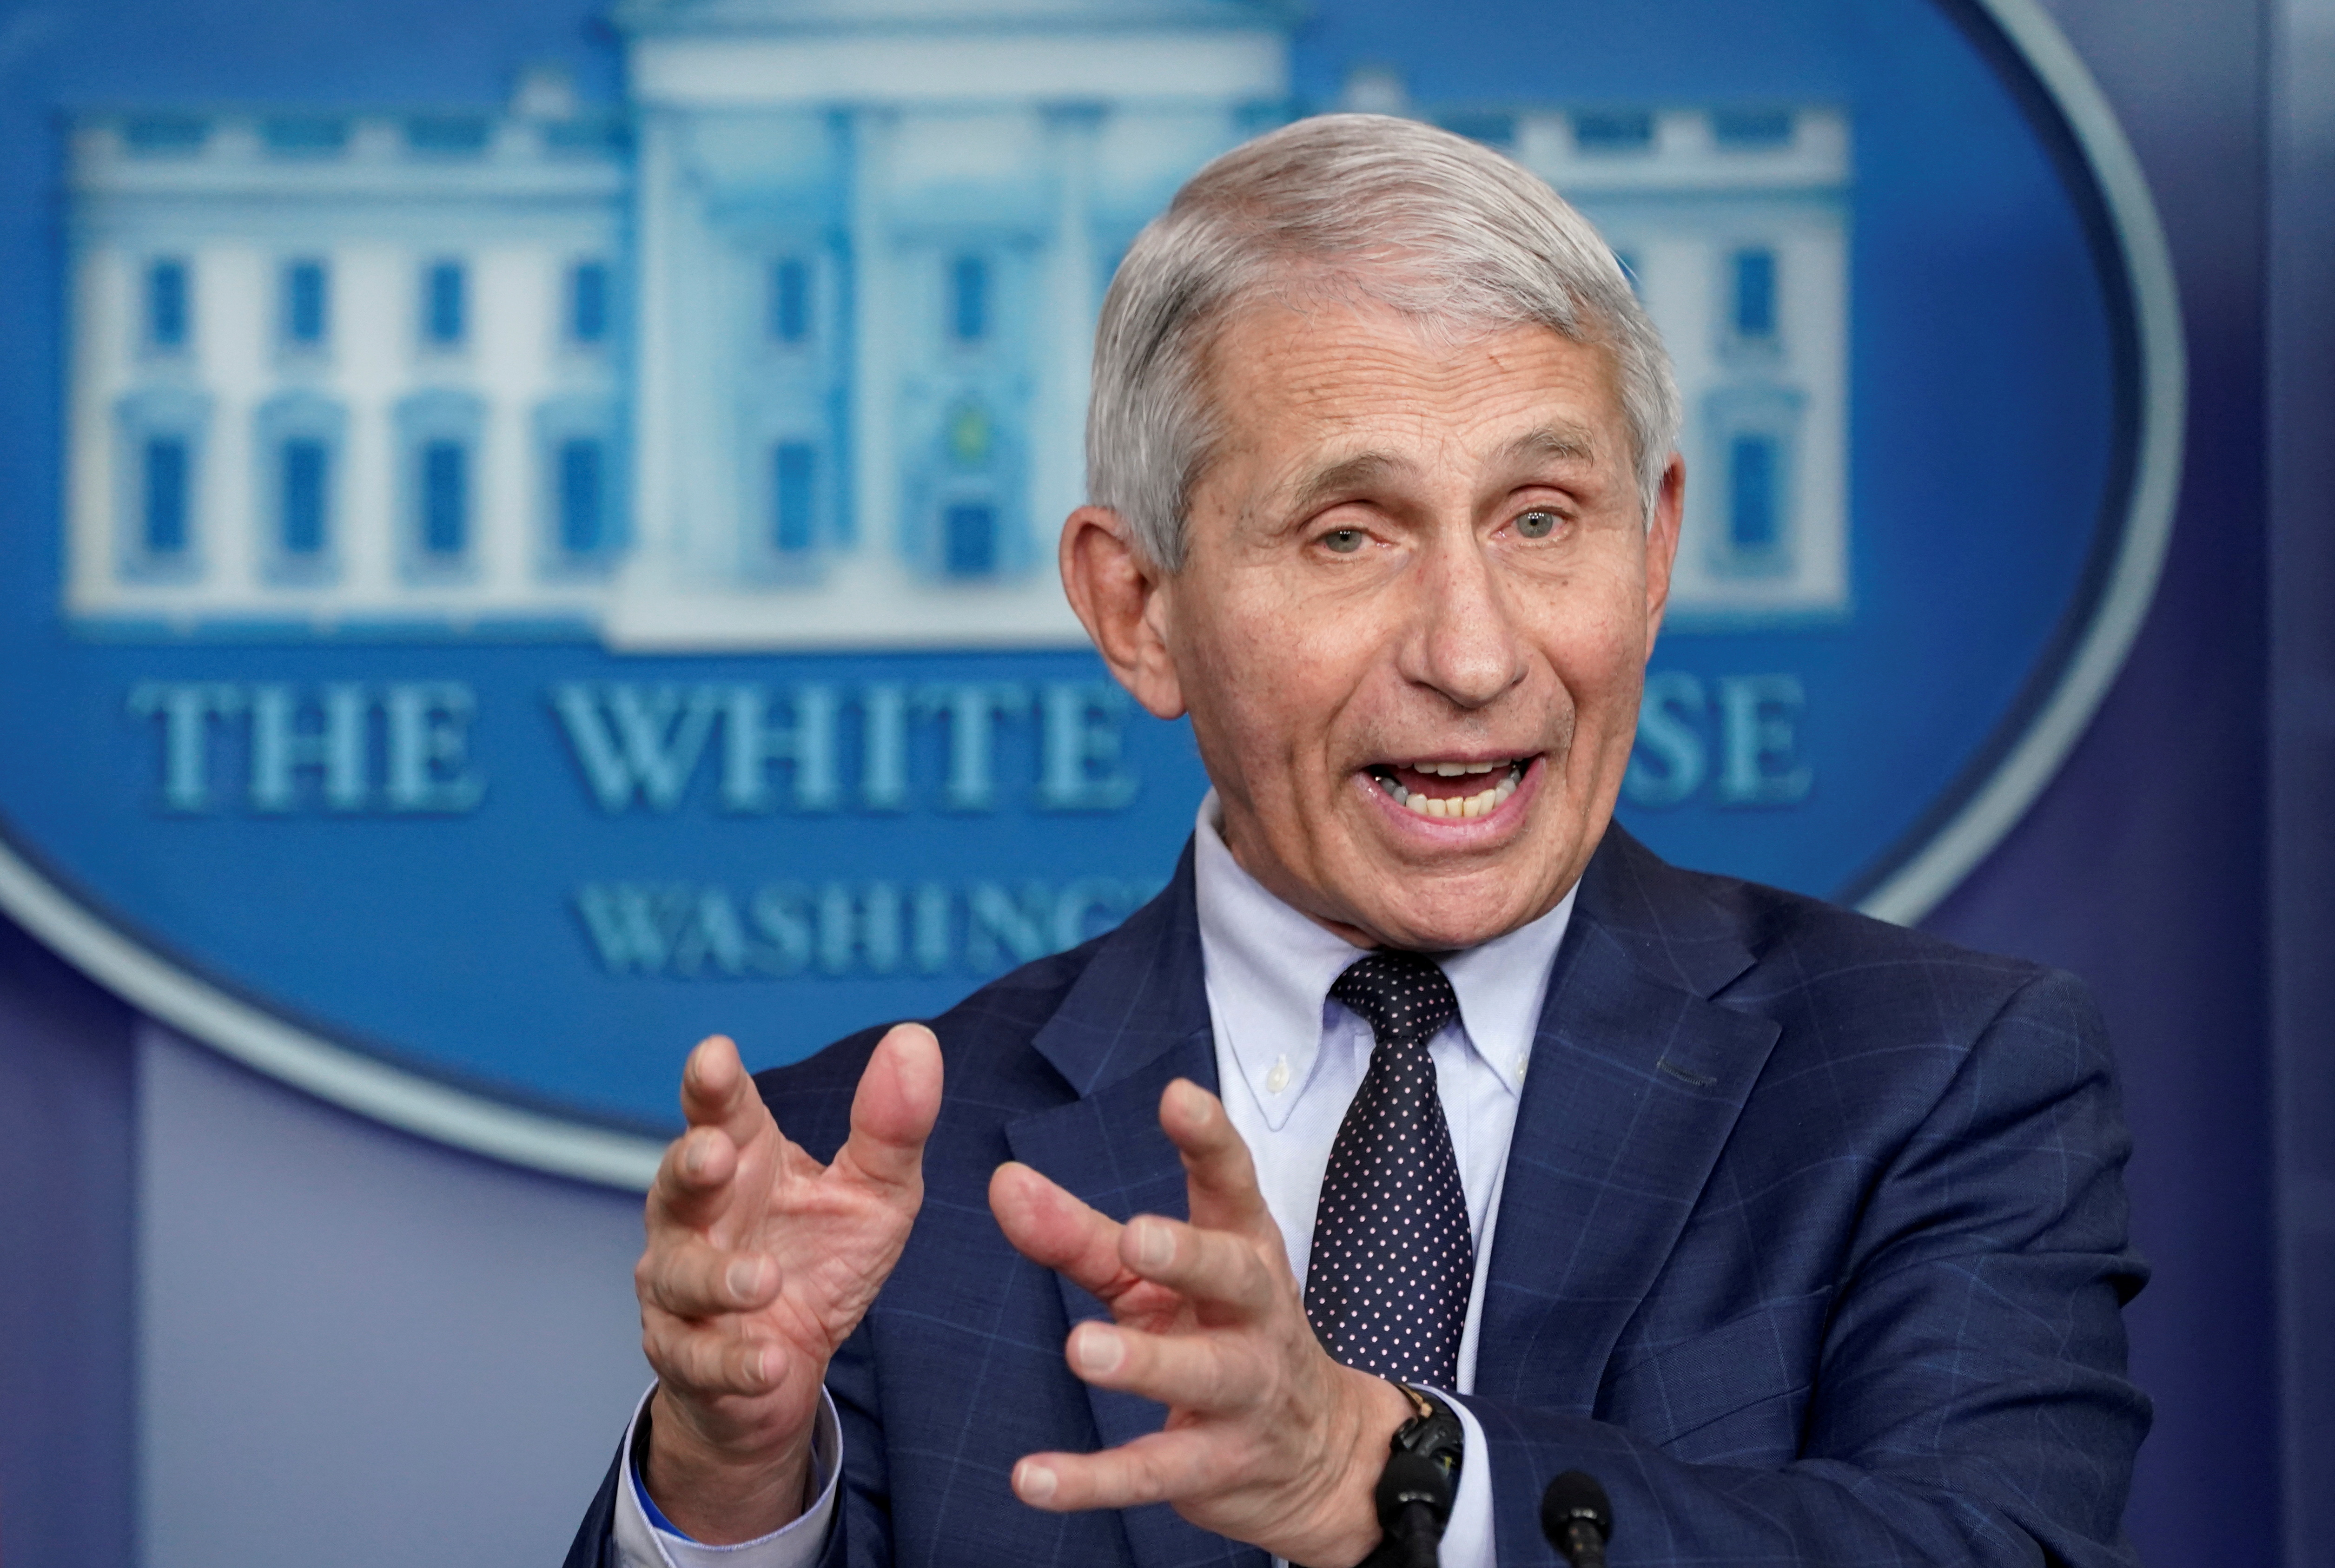 Dr. Anthony Fauci speaks about the Omicron coronavirus variant during a press briefing at the White House in Washington, U.S., December 1, 2021. REUTERS/Kevin Lamarque